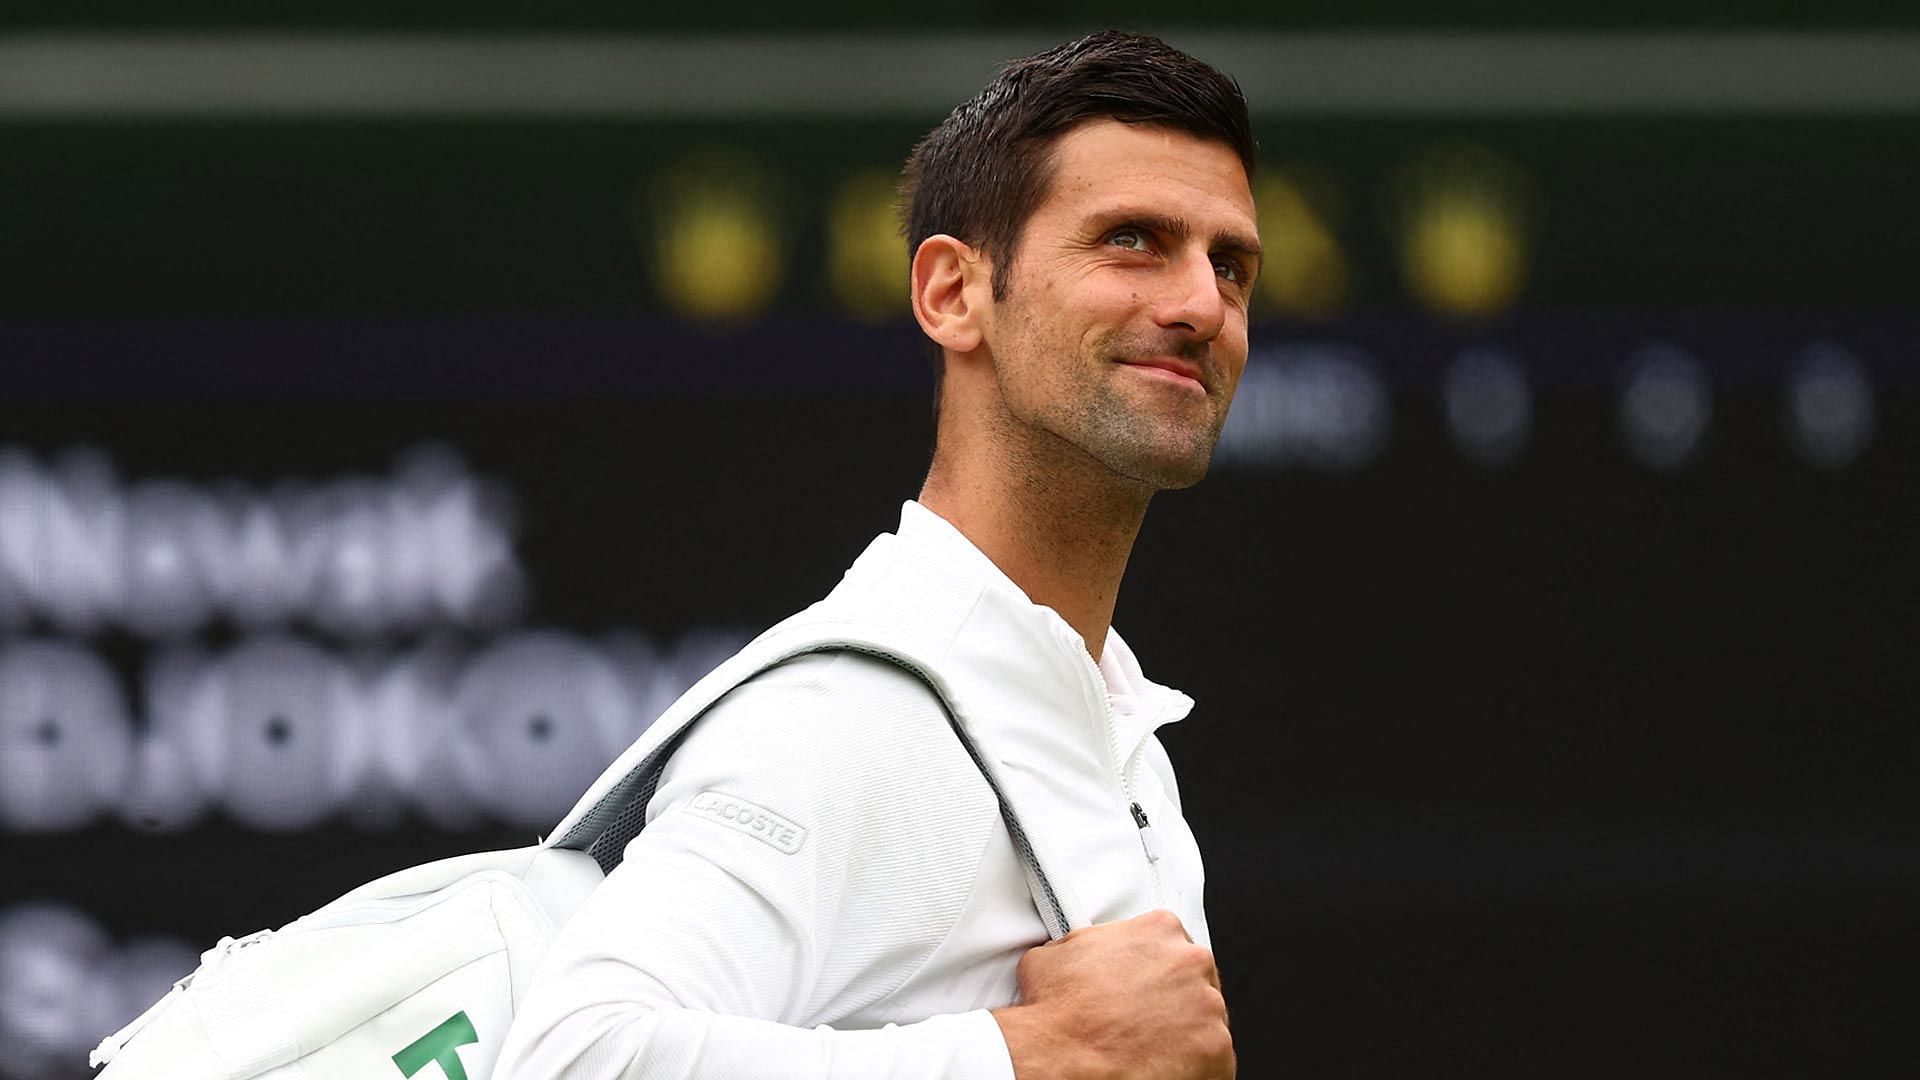 Novak Djokovic put in yet another solid performance to move into the Round of 16